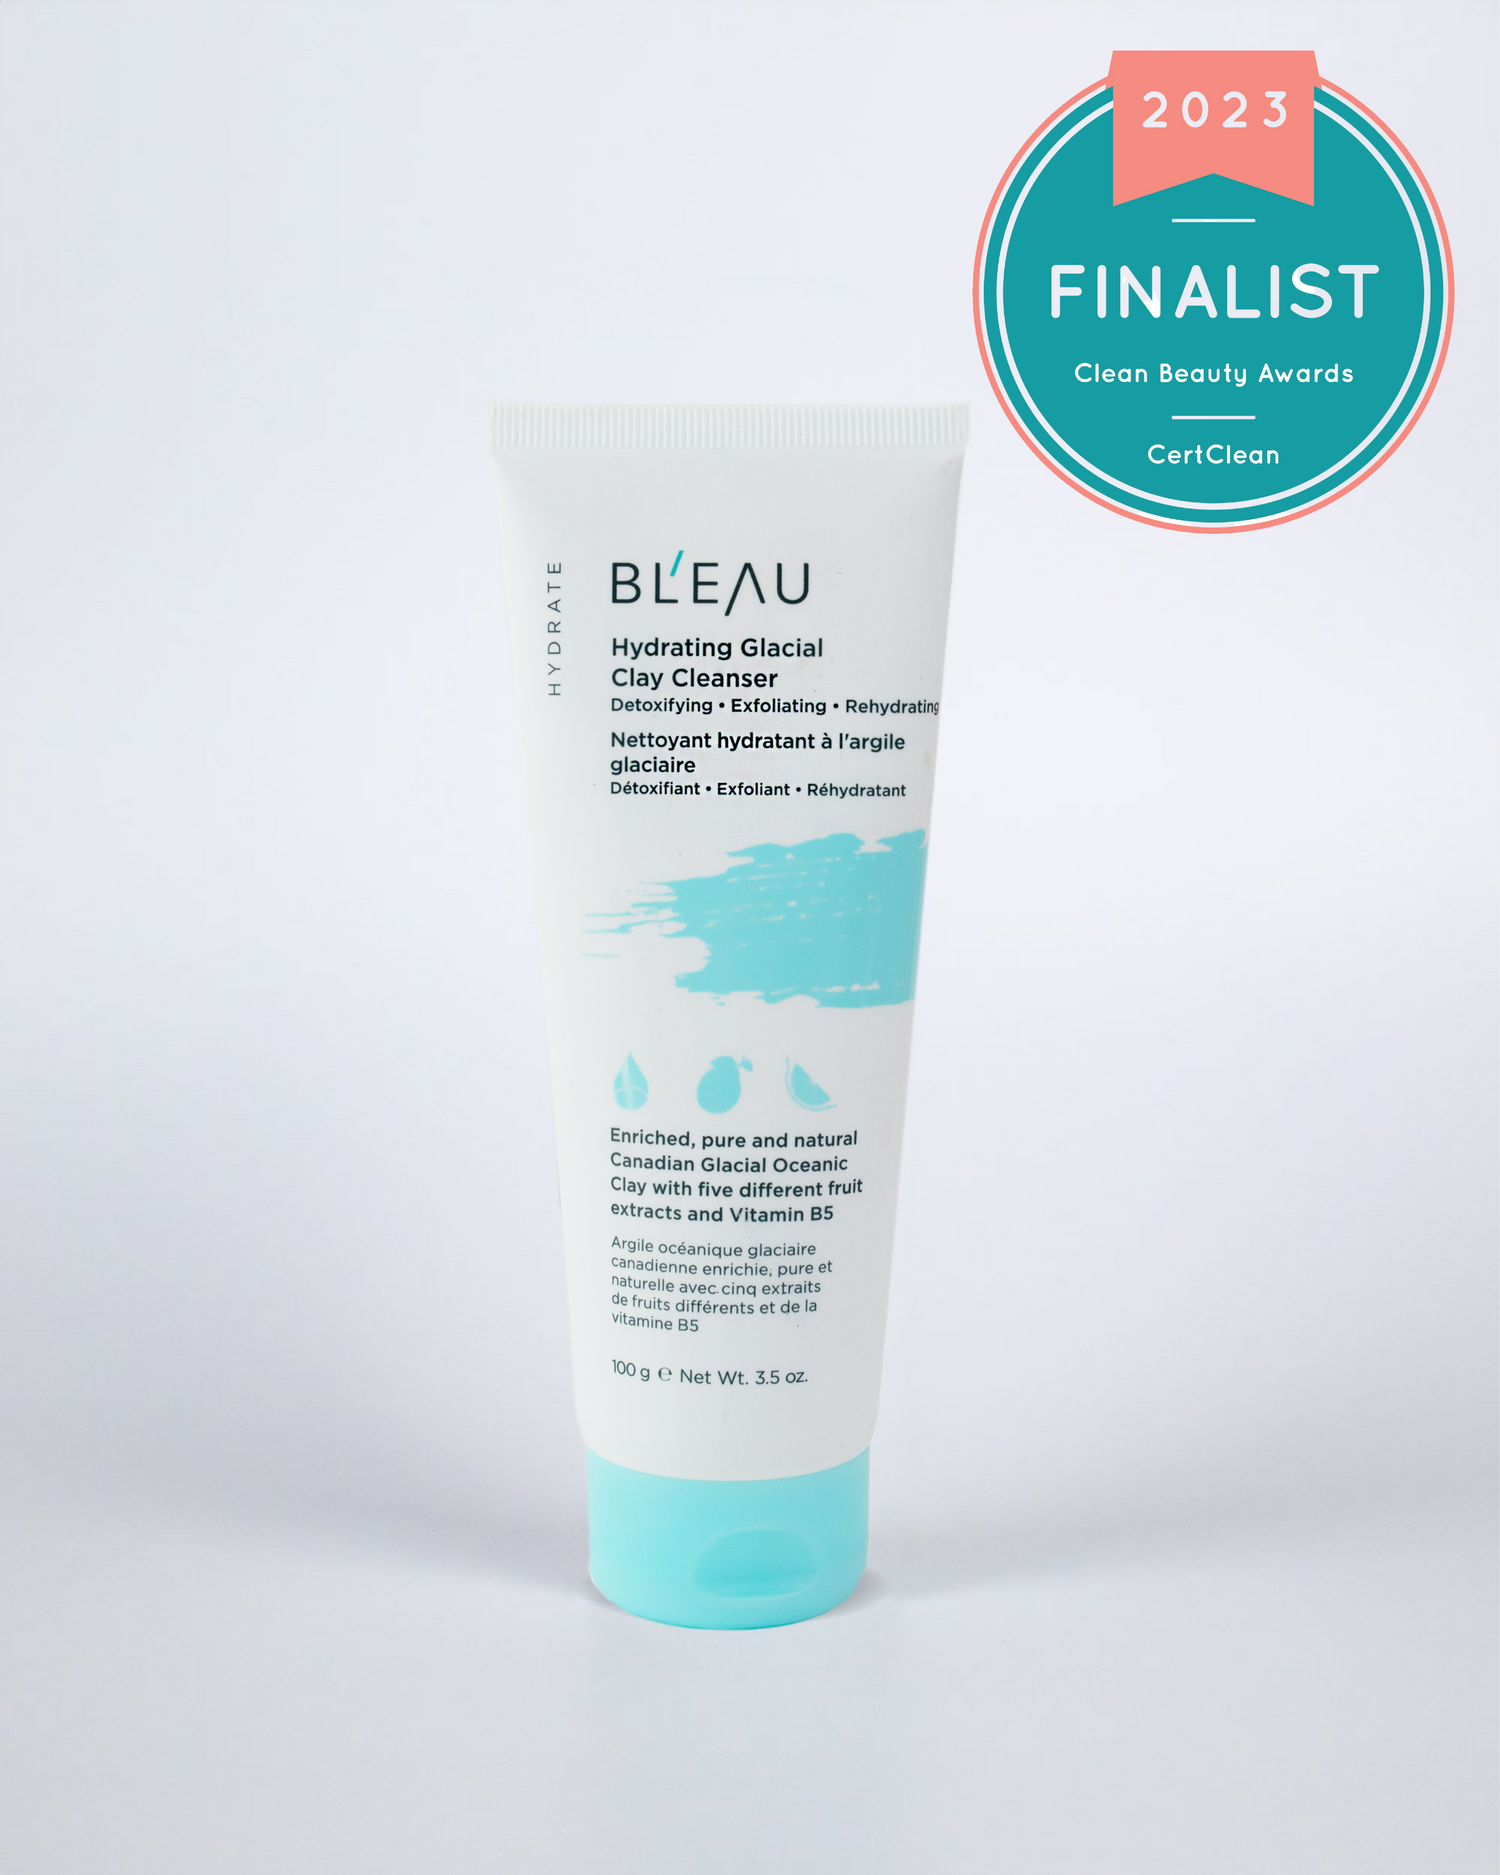 Hydrating Glacial Clay Cleanser